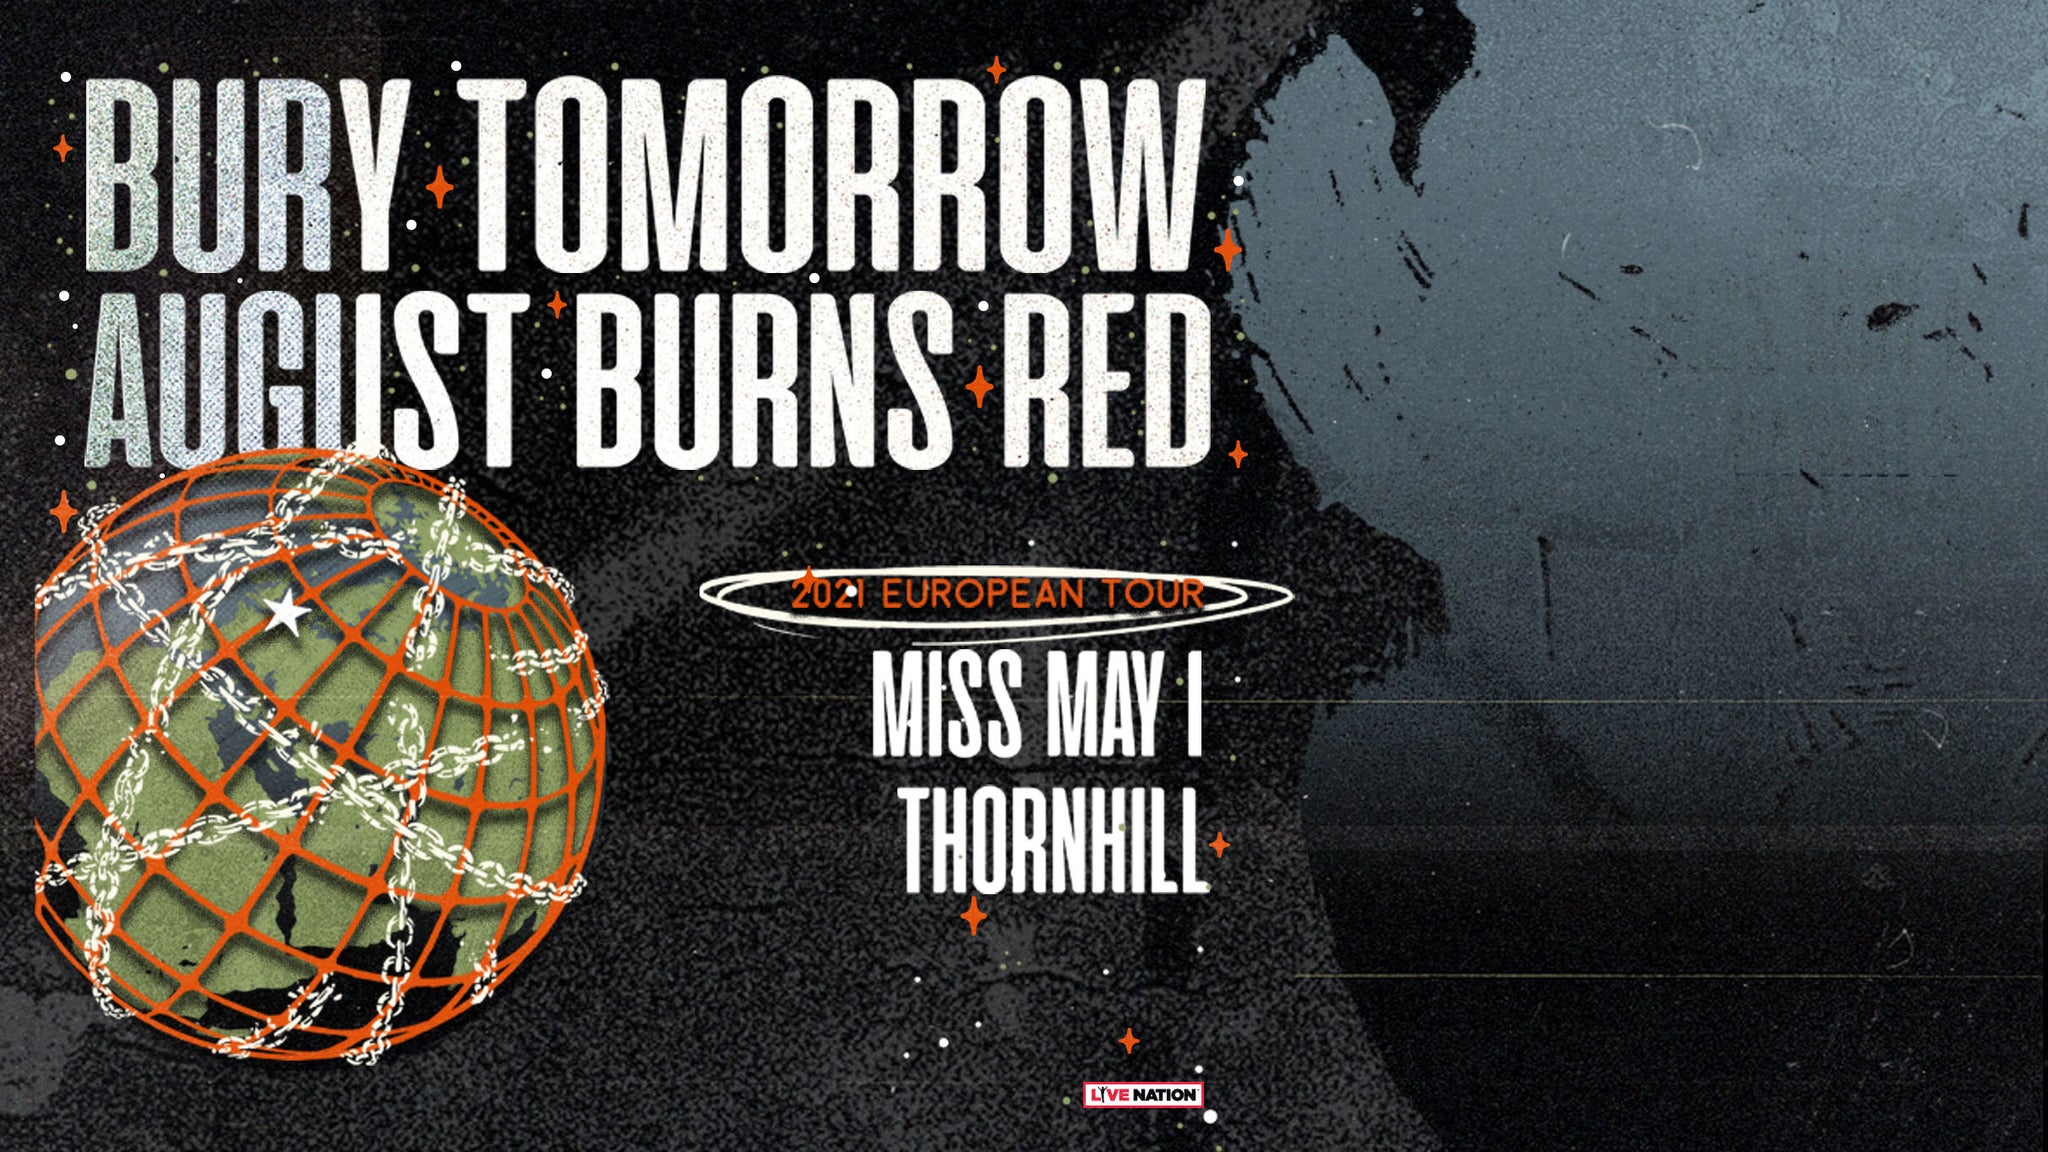 Bury Tomorrow & August Burns Red Event Title Pic